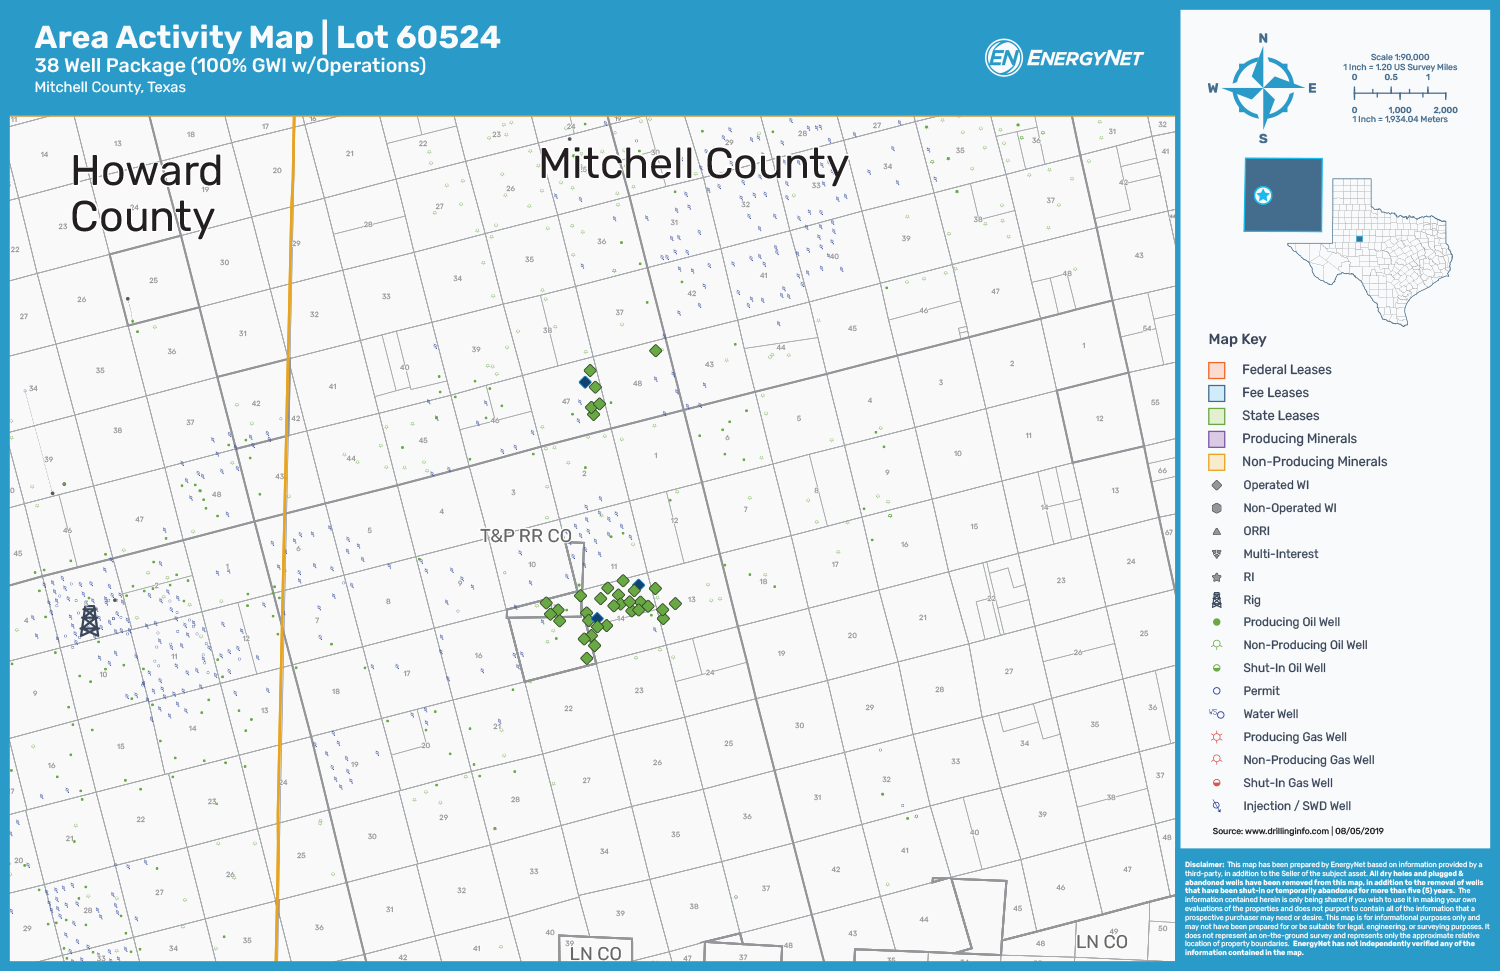 TRE Investments Permian Basin Operations, Mitchell County, Texas Asset Map (Source: EnergyNet)